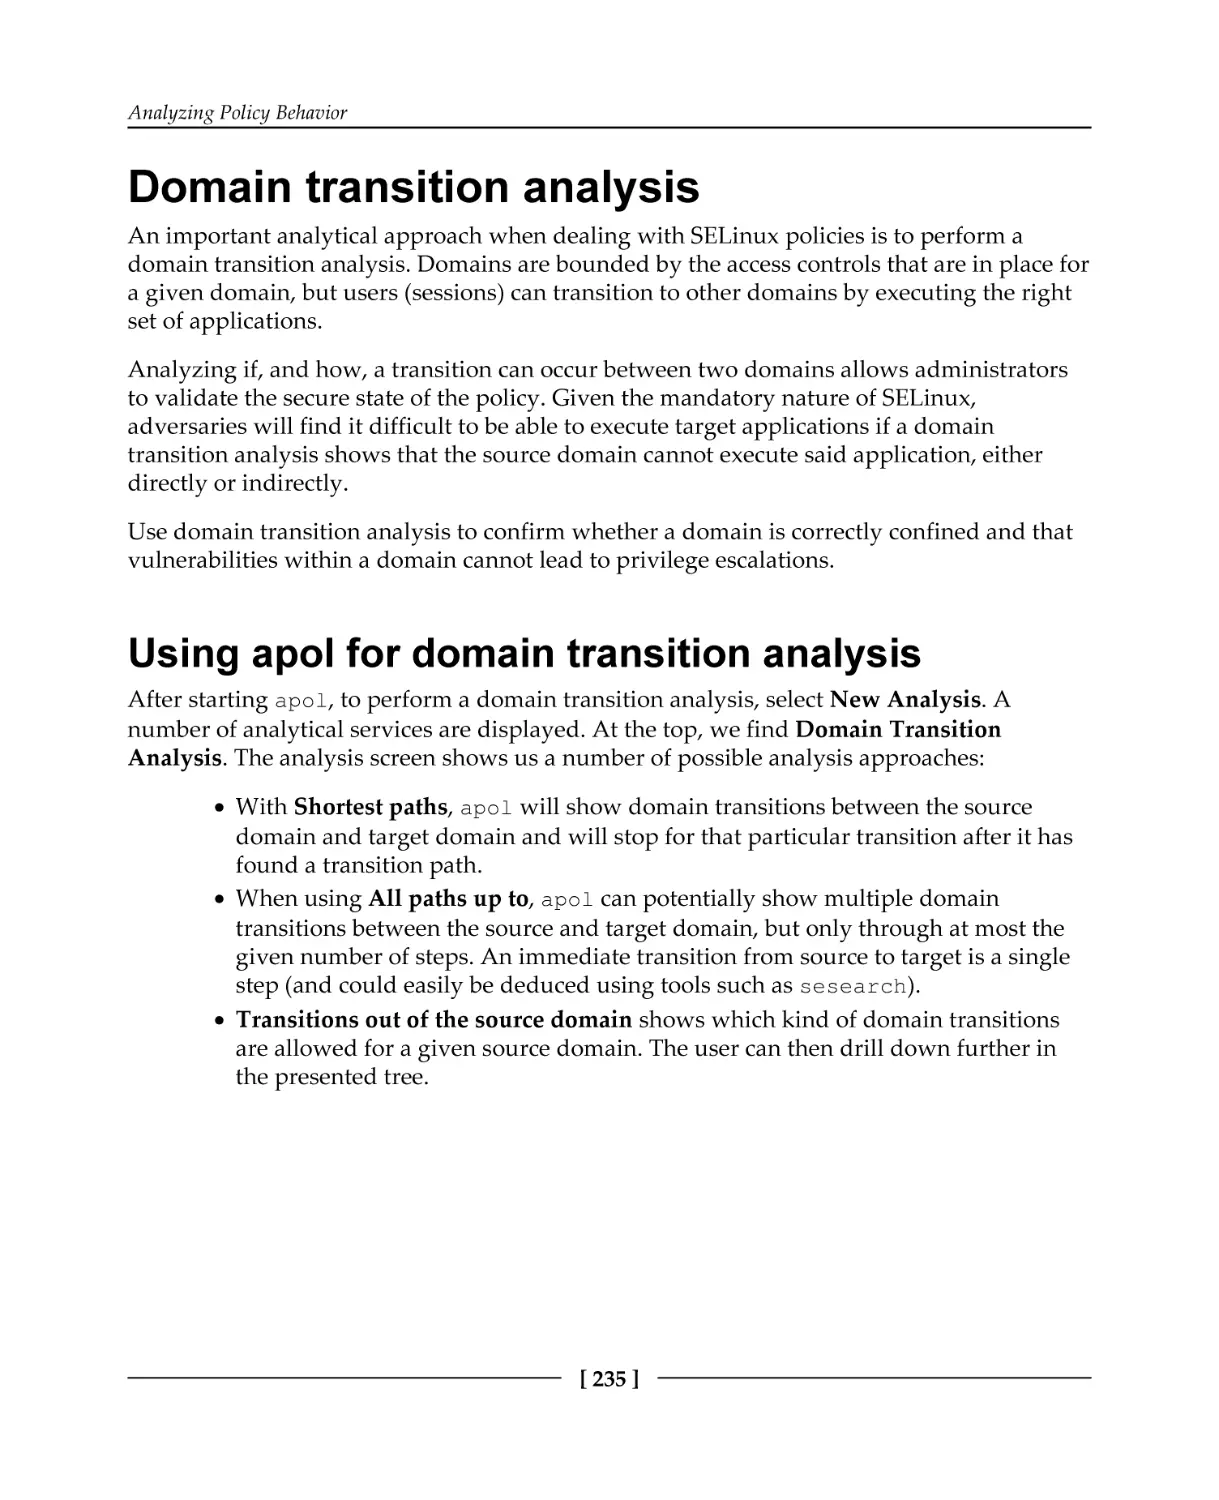 Domain transition analysis
Using apol for domain transition analysis